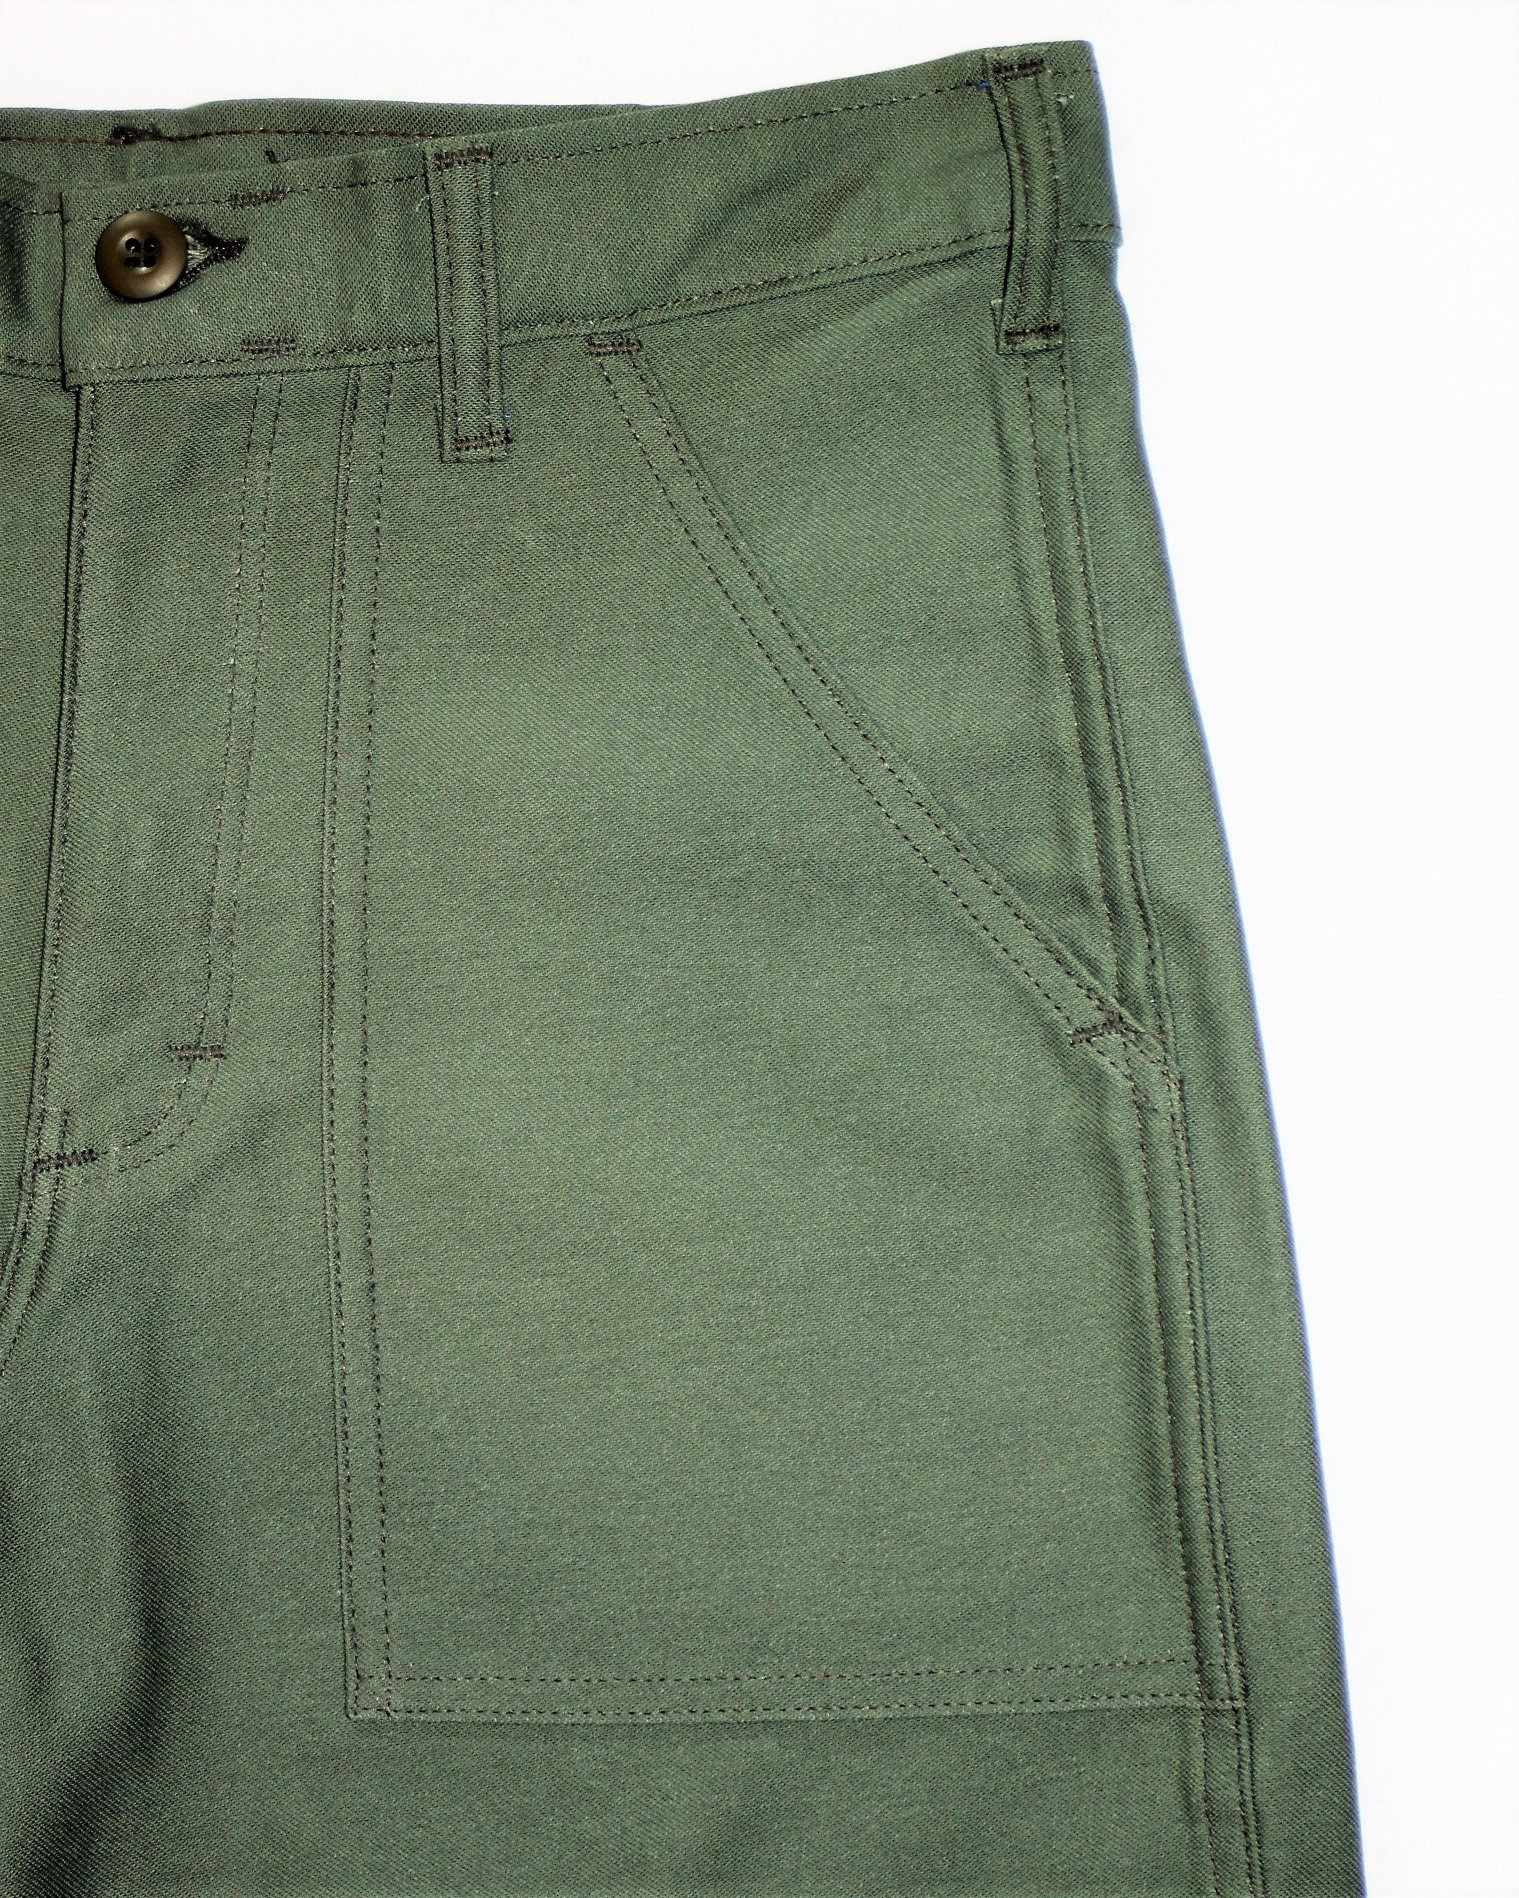 【Close Out Sale】gung ho SLIM FIT 4Pocket Fatigues KhakiTwill